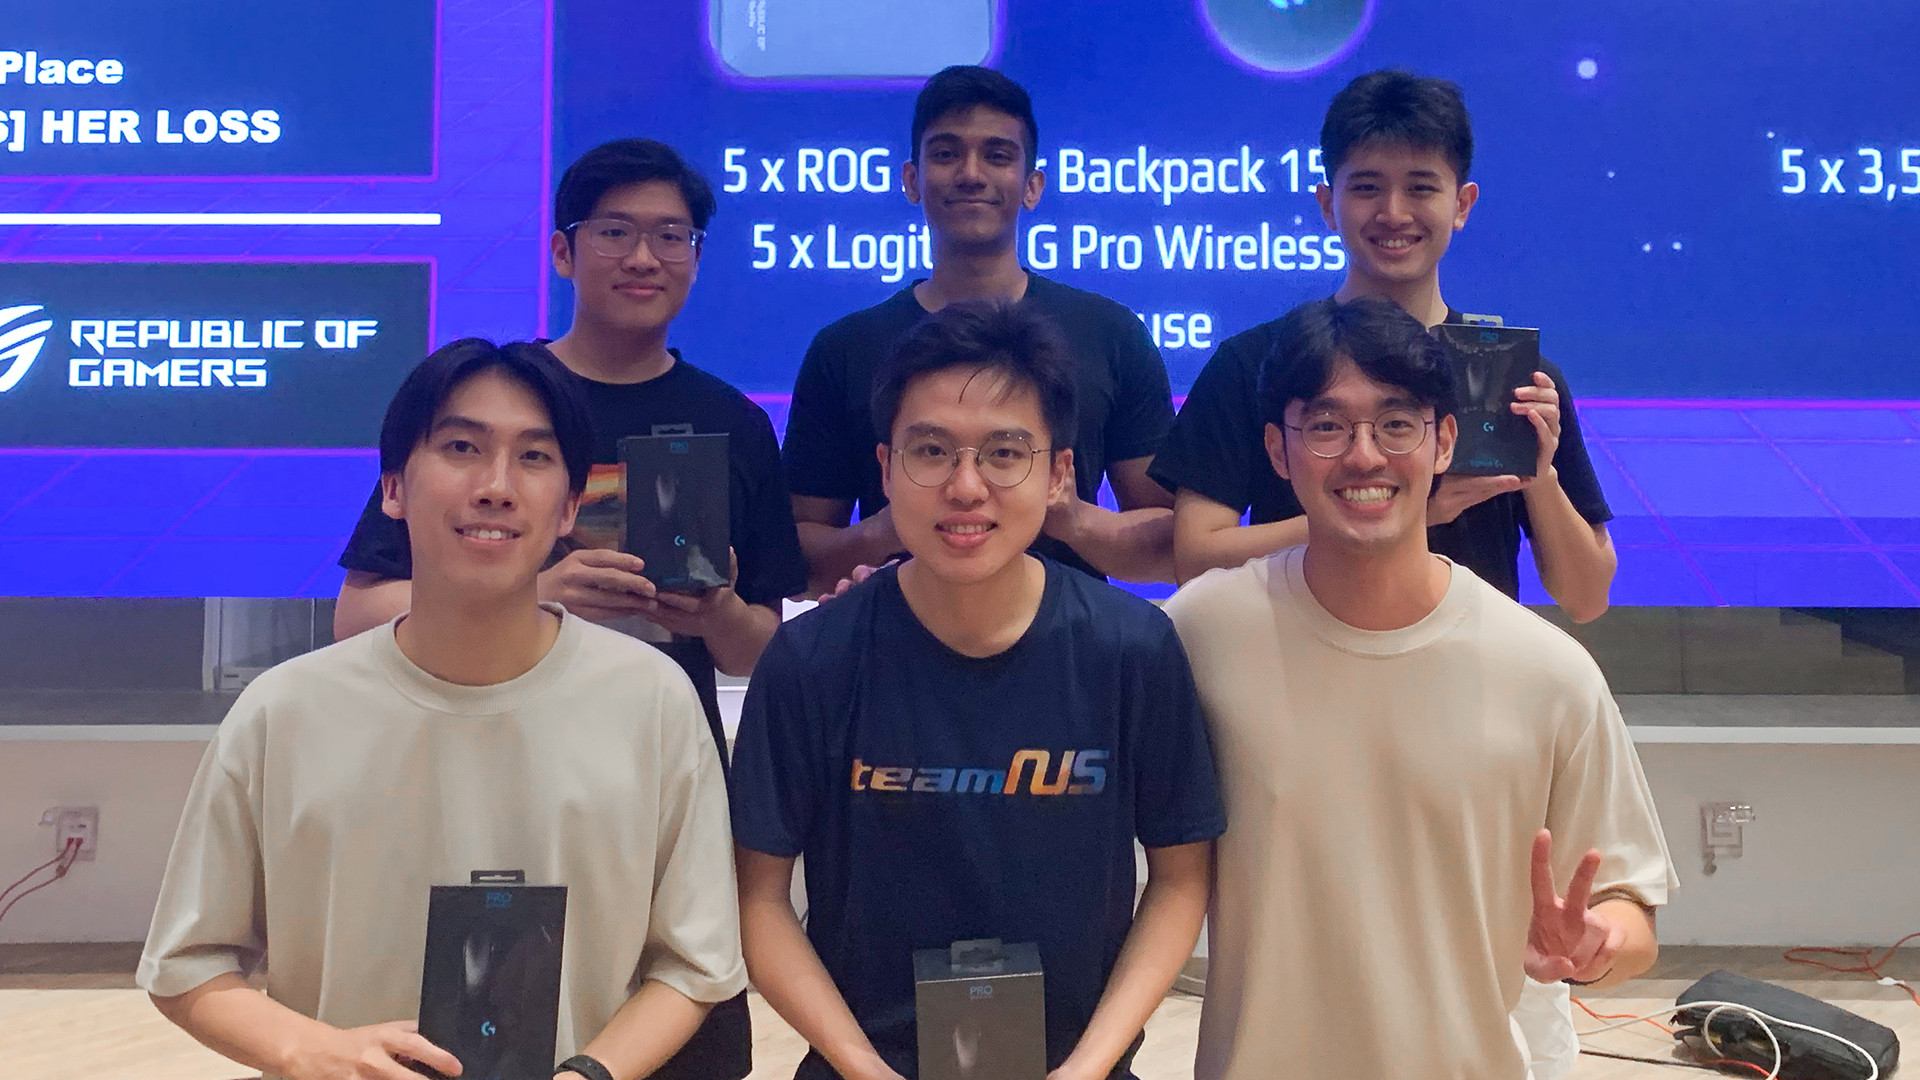 Outgoing NUS Esports President and Esports Director Ong Jing Hao (front row extreme right) with the NUS “no.men” team – (clockwise from top left) Hayden “xhum0n” Heng, Amirudeen “NAom” S/O Abdul Rahman, Aidan “lorenzo” Phua, Darryl “RushBobby” See and Isaac “DEMONKING999” Lai.